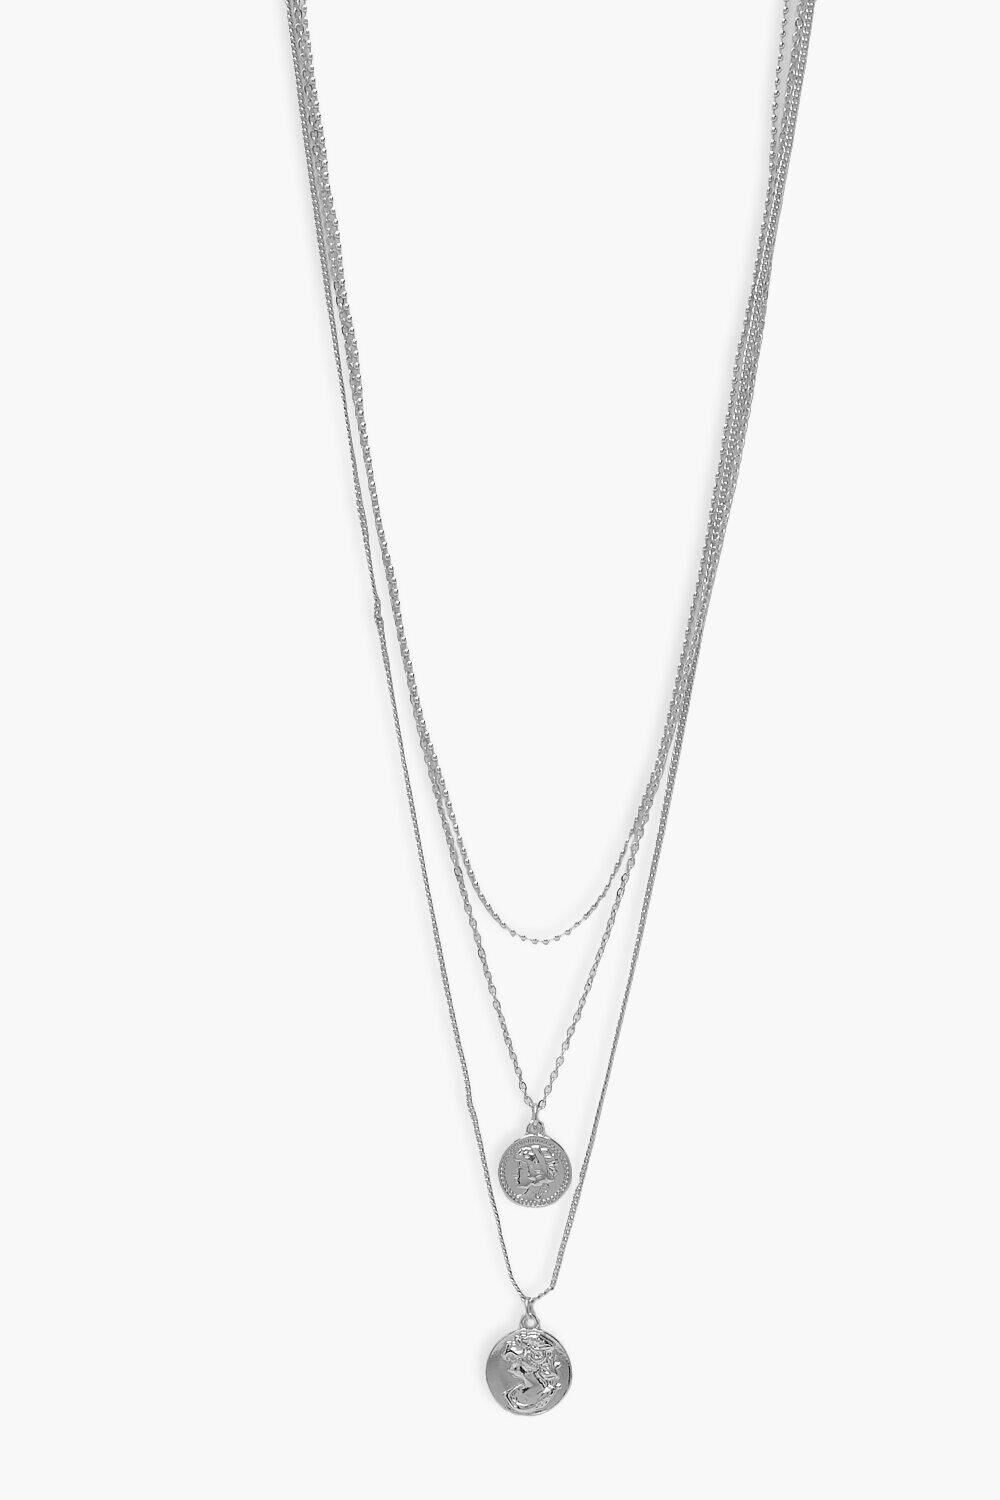 Boohoo Simple Coin Layered Necklace- Grey  - Size: ONE SIZE